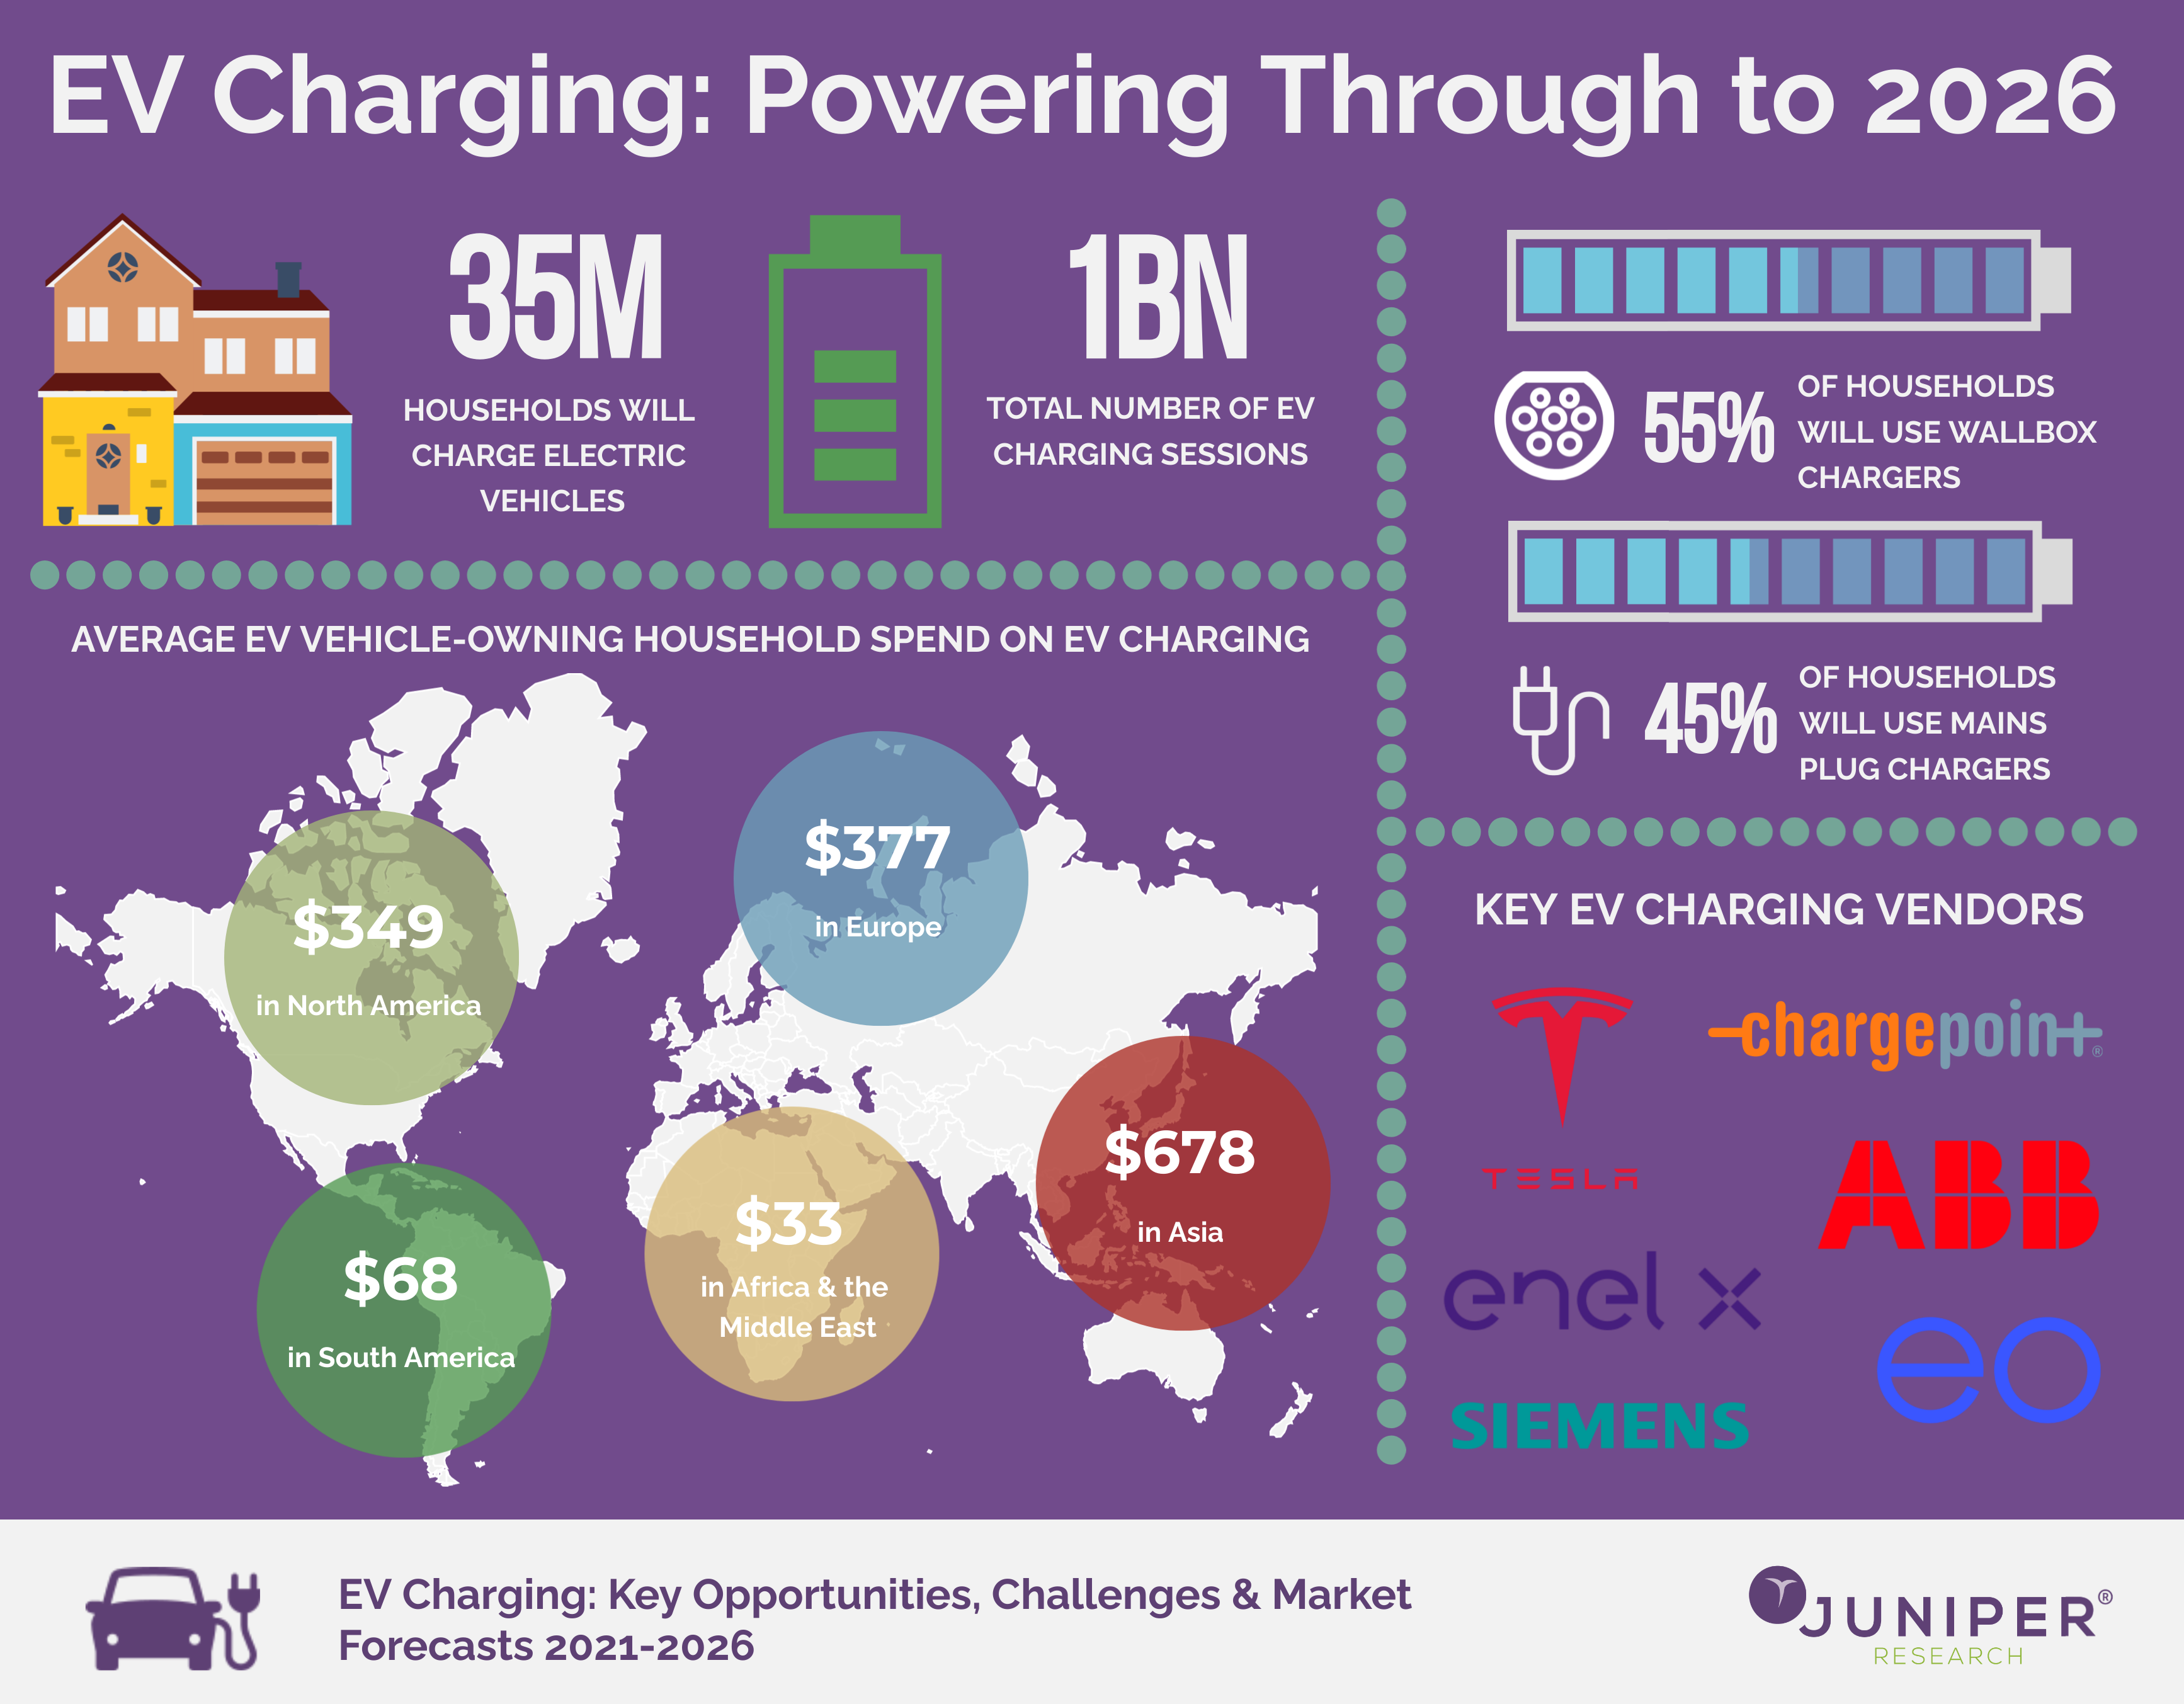 Home electric vehicles charging spend to exceed $16 billion globally by 2026